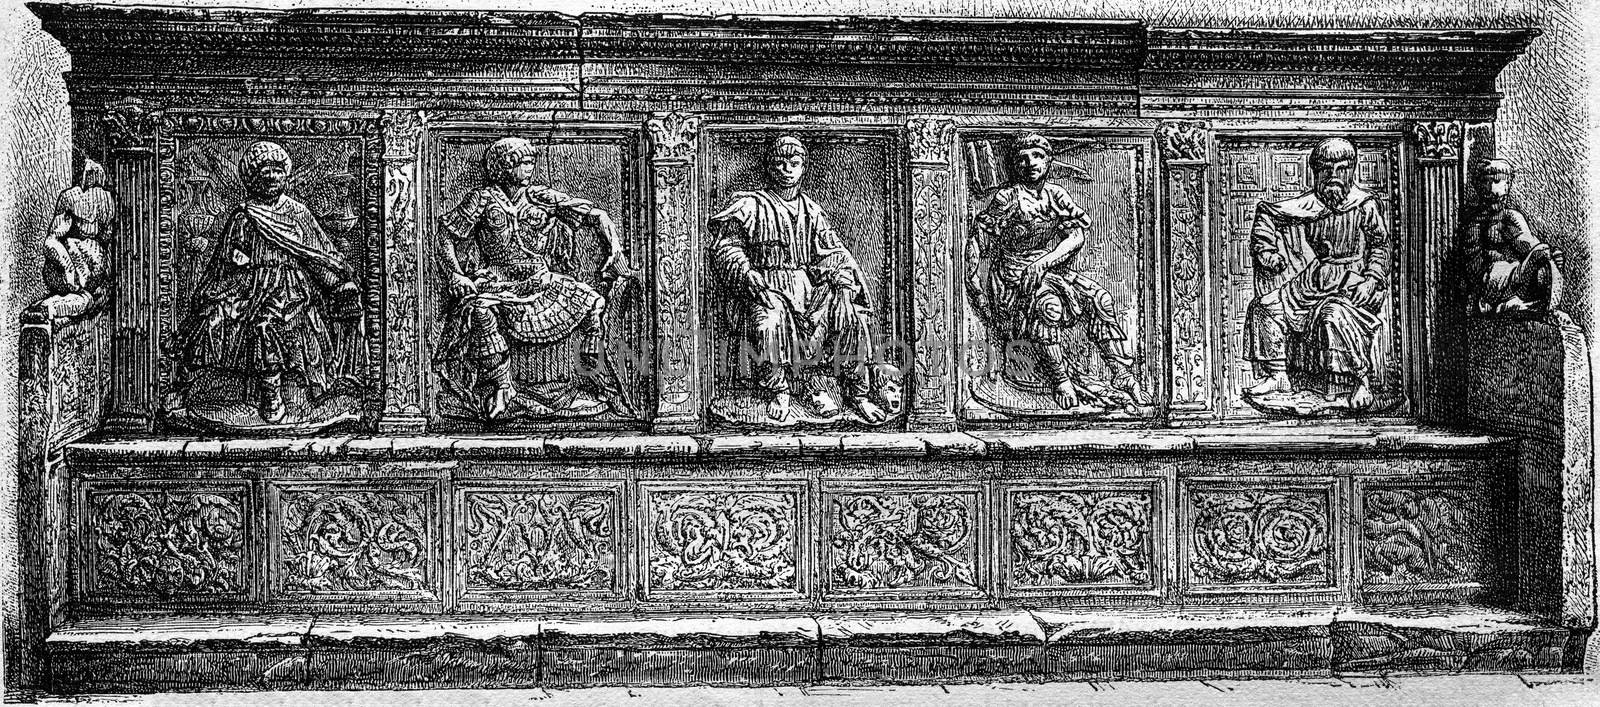 One of the benches of the Lodge of Merchants in Siena, vintage engraved illustration. Magasin Pittoresque 1877.
